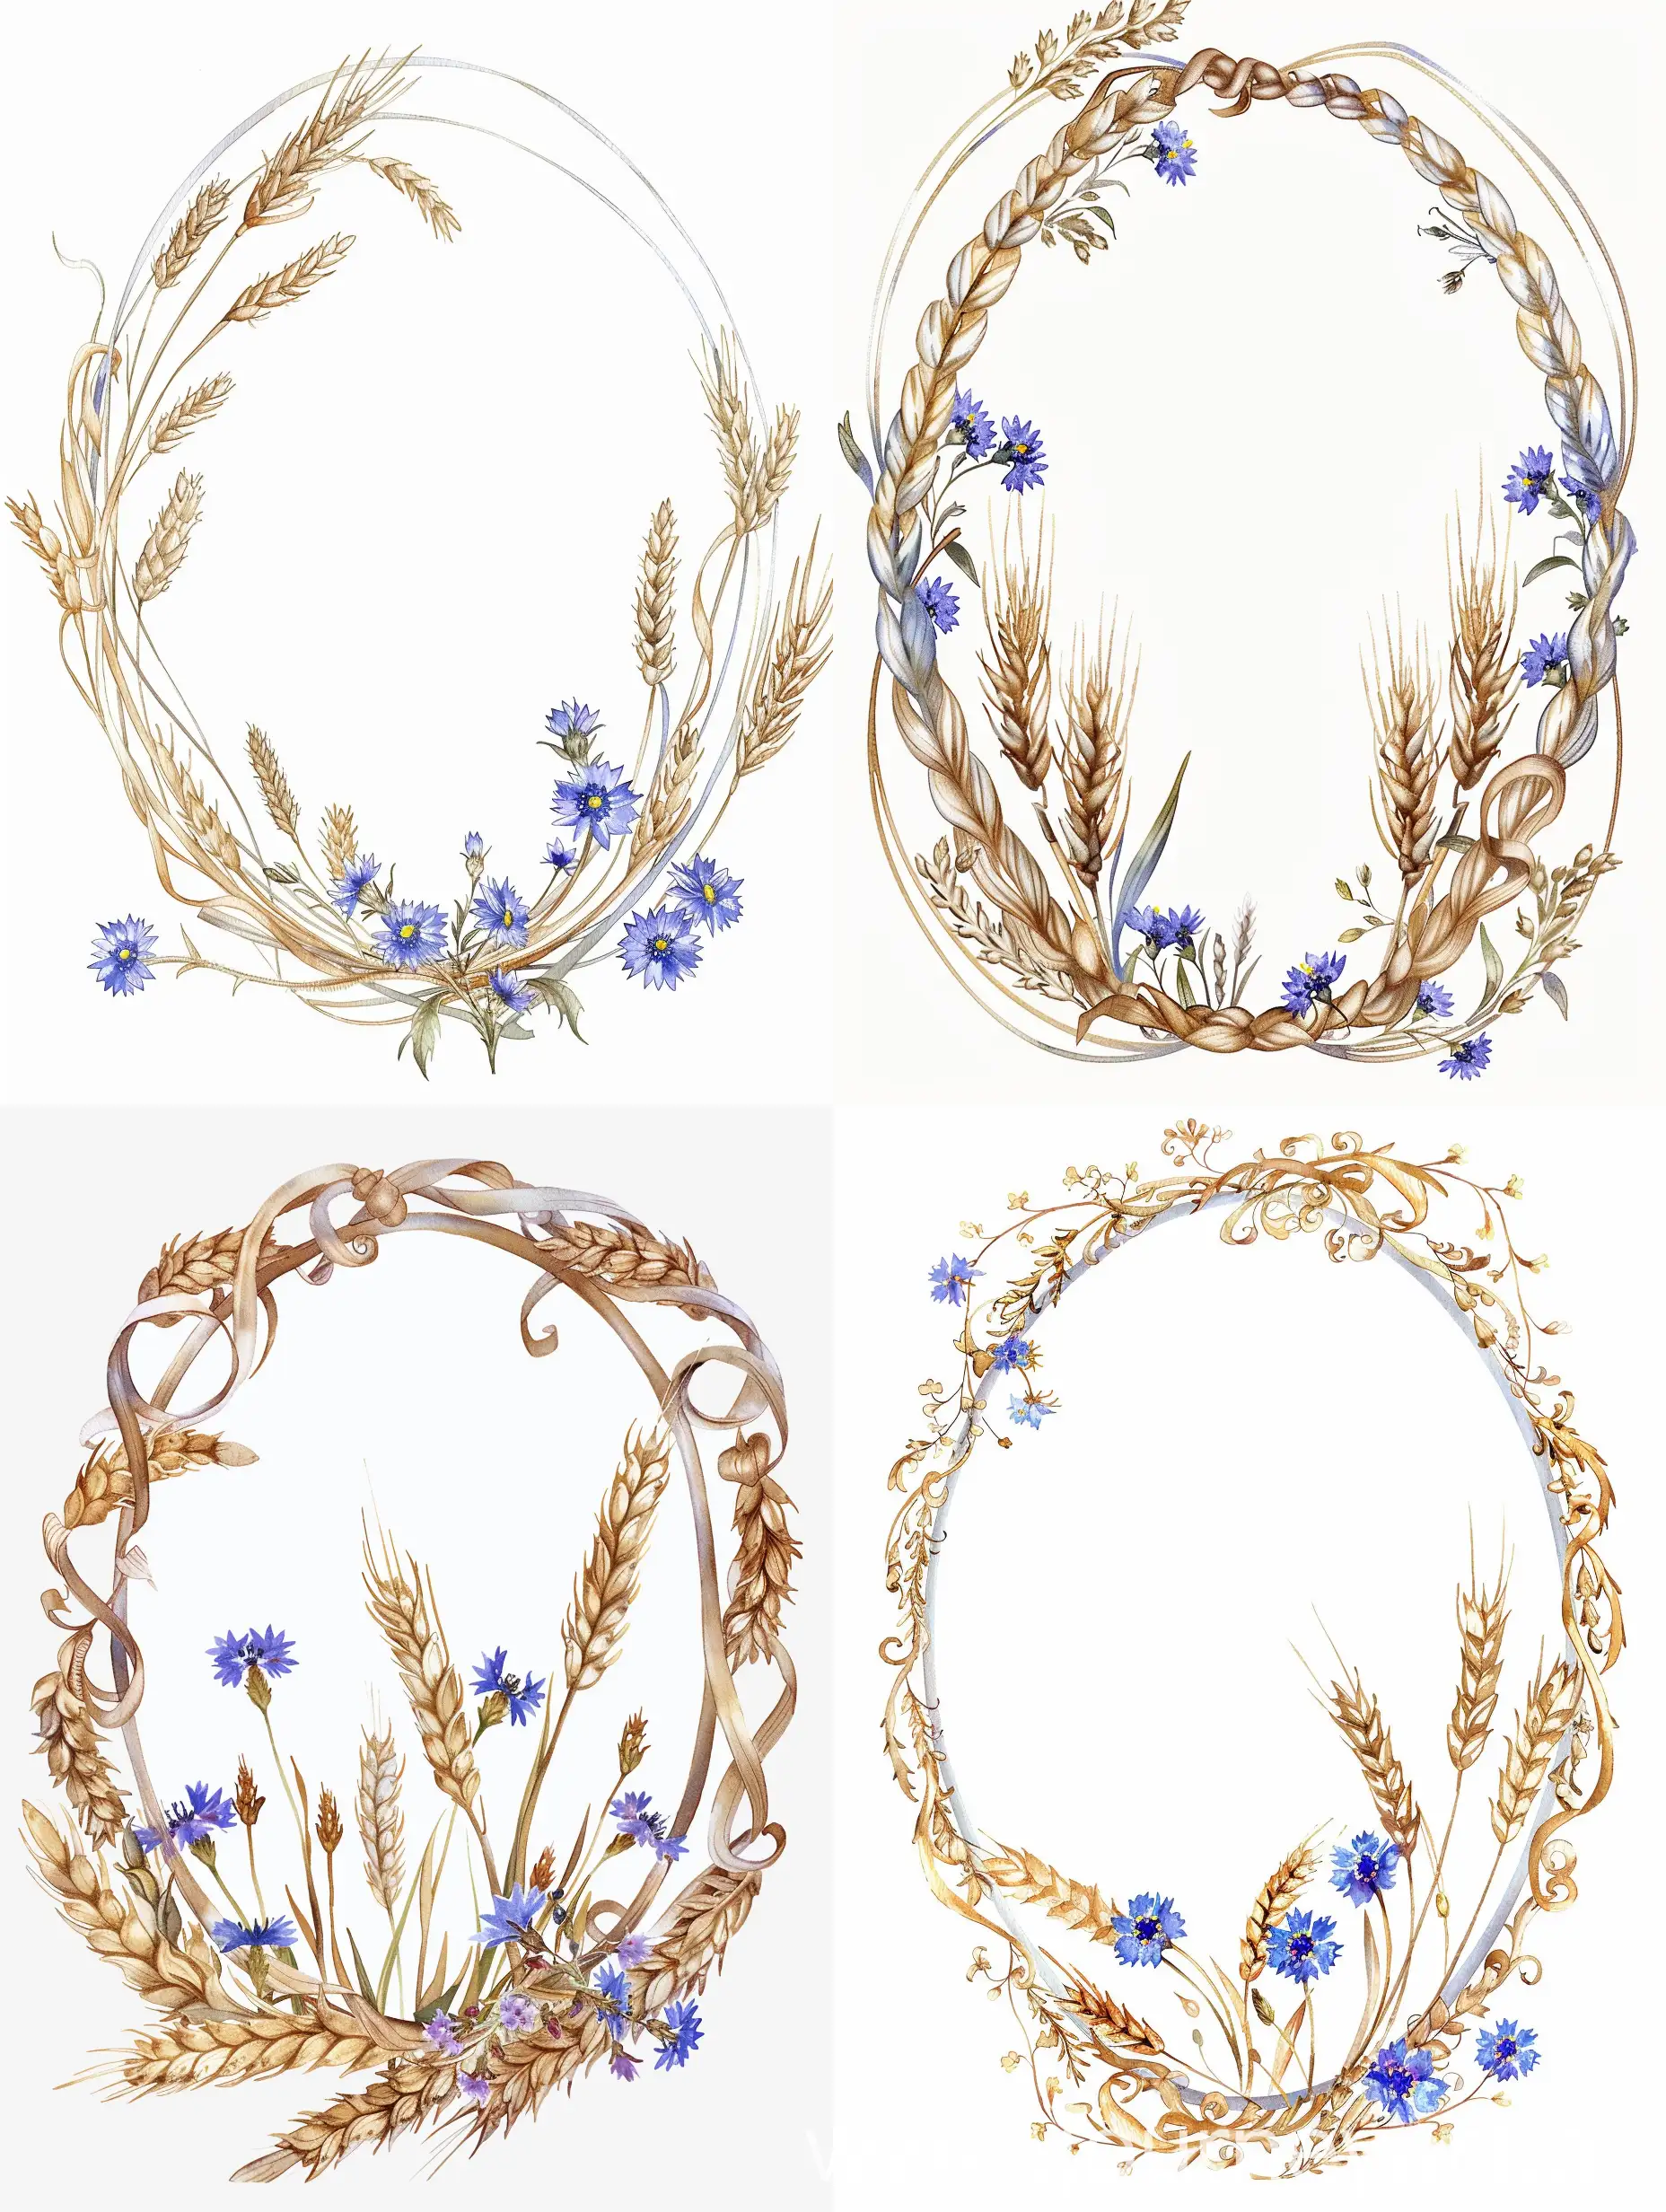  Oval frame with dense, delicate curly ornament of small wheat leaves and spikelets, small cornflower flowers, on a white background, flat illustration, small details, watercolor, Victorian style
